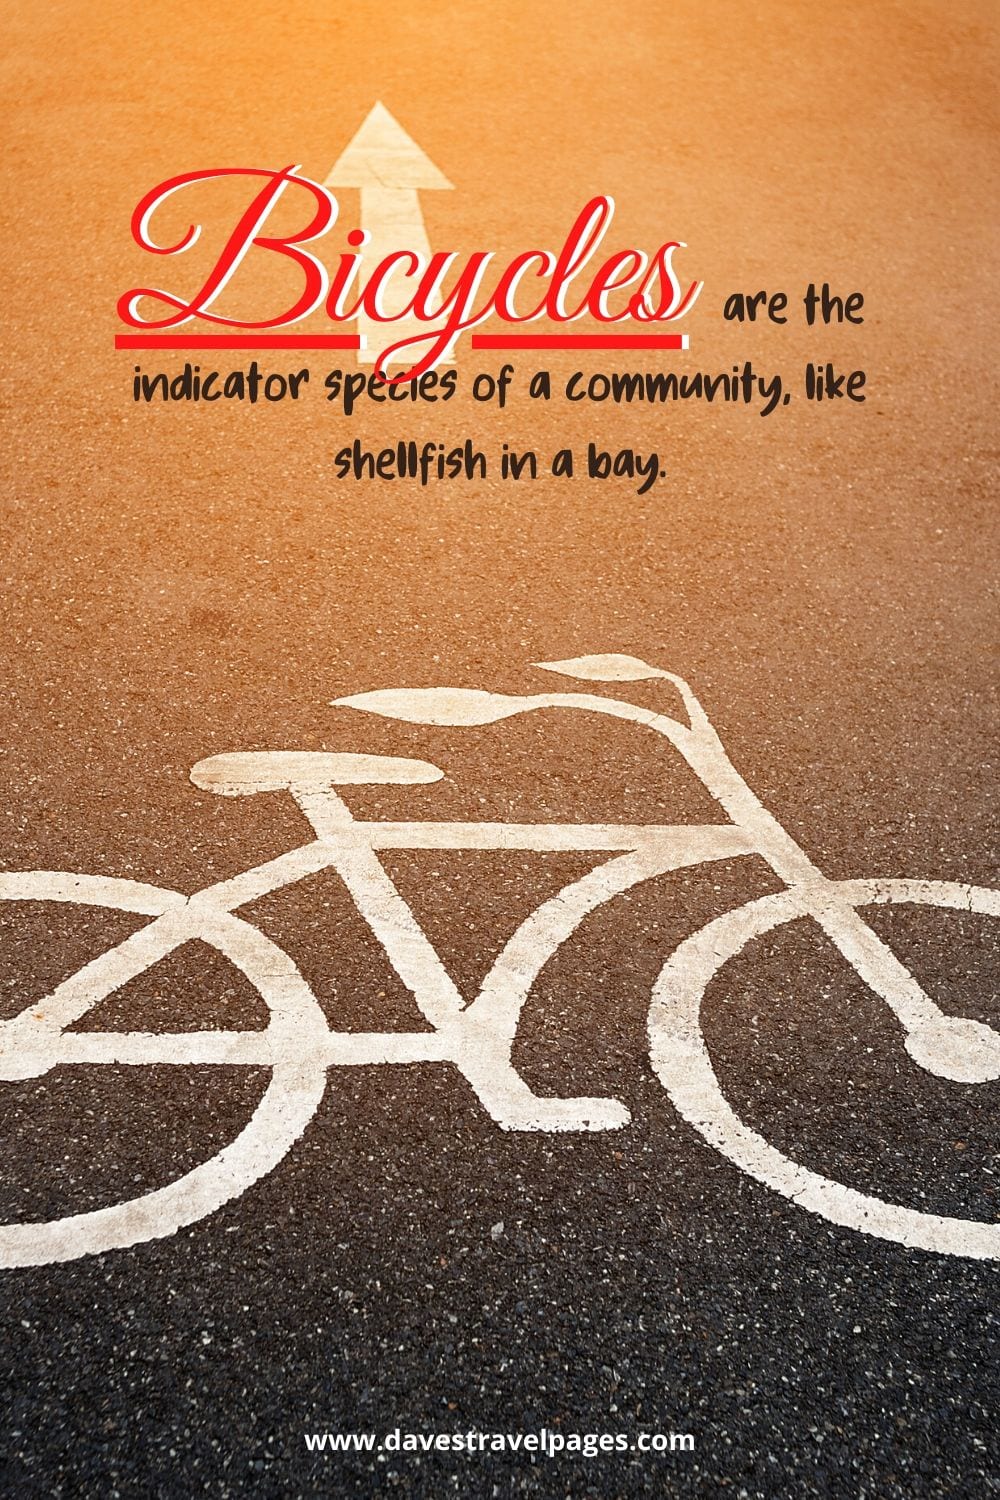 Bicycles are the indicator species of a community, like shellfish in a bay. ~ P. Martin Scott